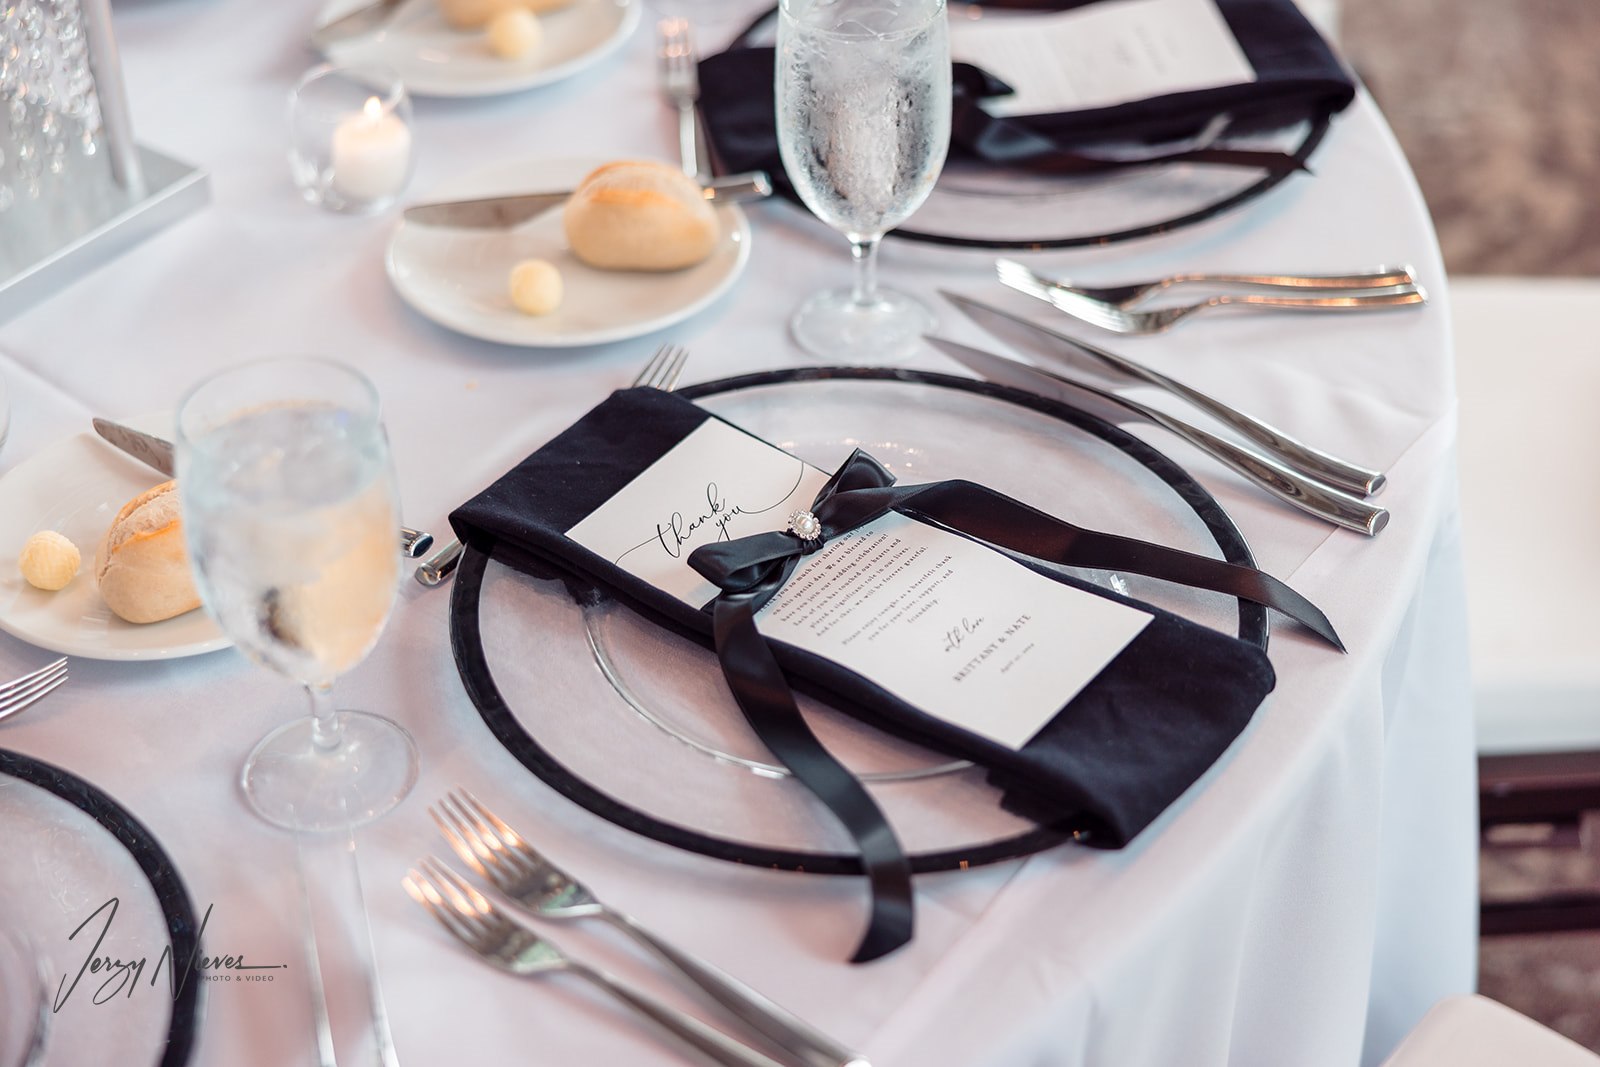 Close-up of a guest table set with elegant tableware and a thank you note placed on each plate.